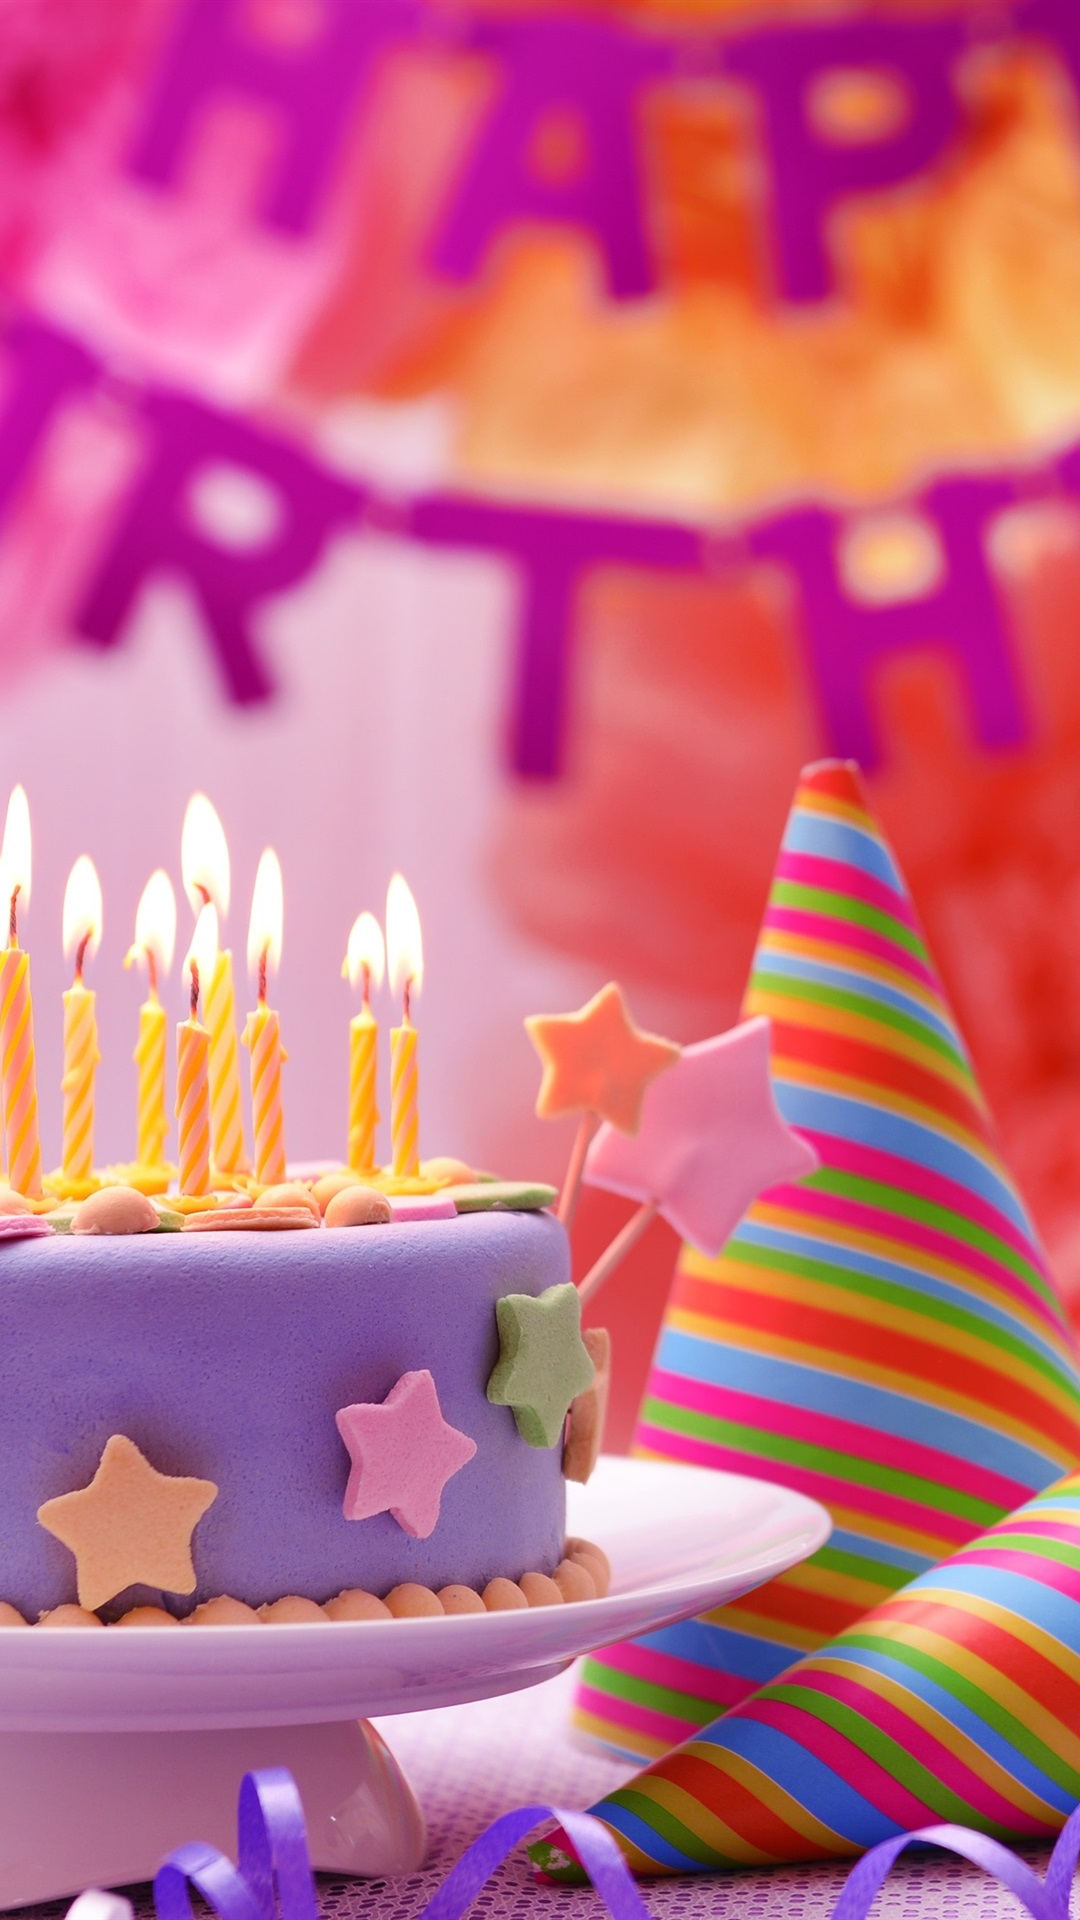 Iphone Wallpaper Happy Birthday, Cake, Colorful Decoration, - Bright Cake  Background - 1080x1920 Wallpaper 